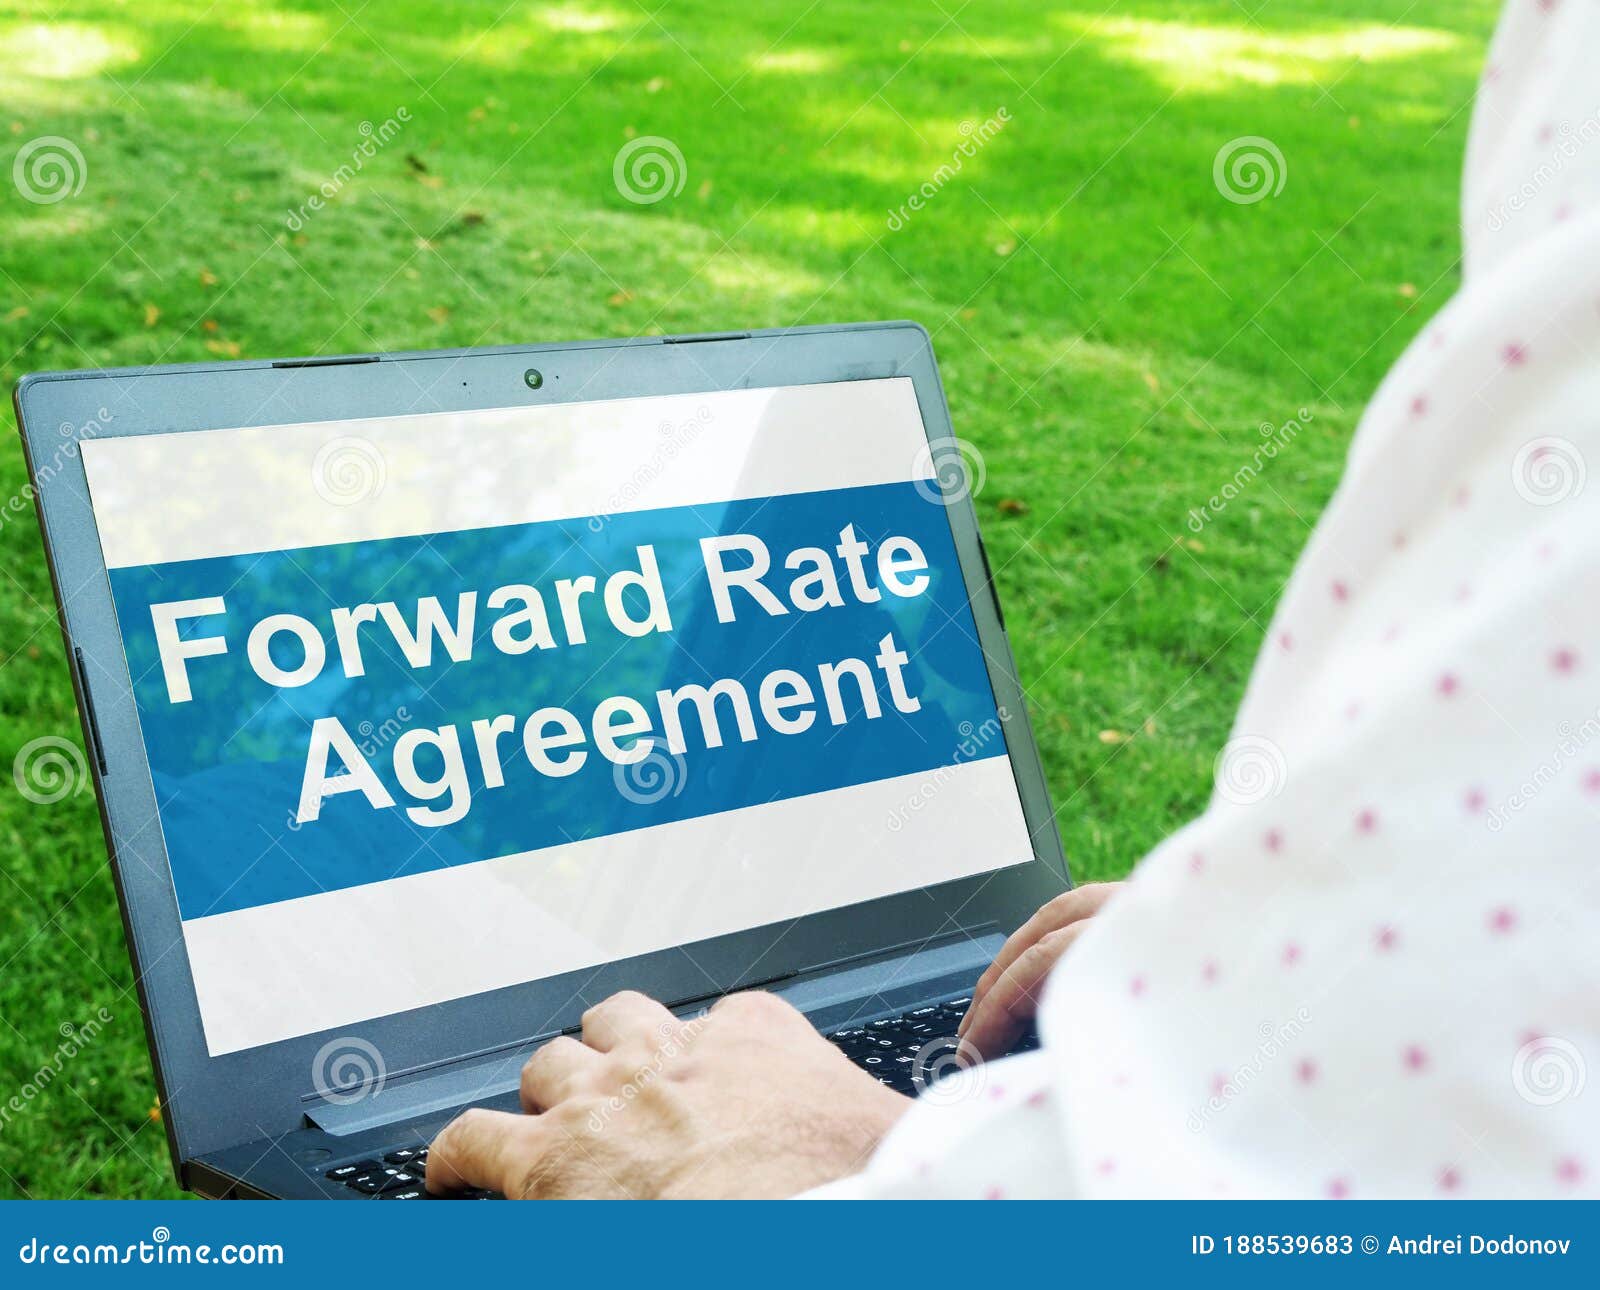 forward rate agreement fra is shown on the conceptual business photo